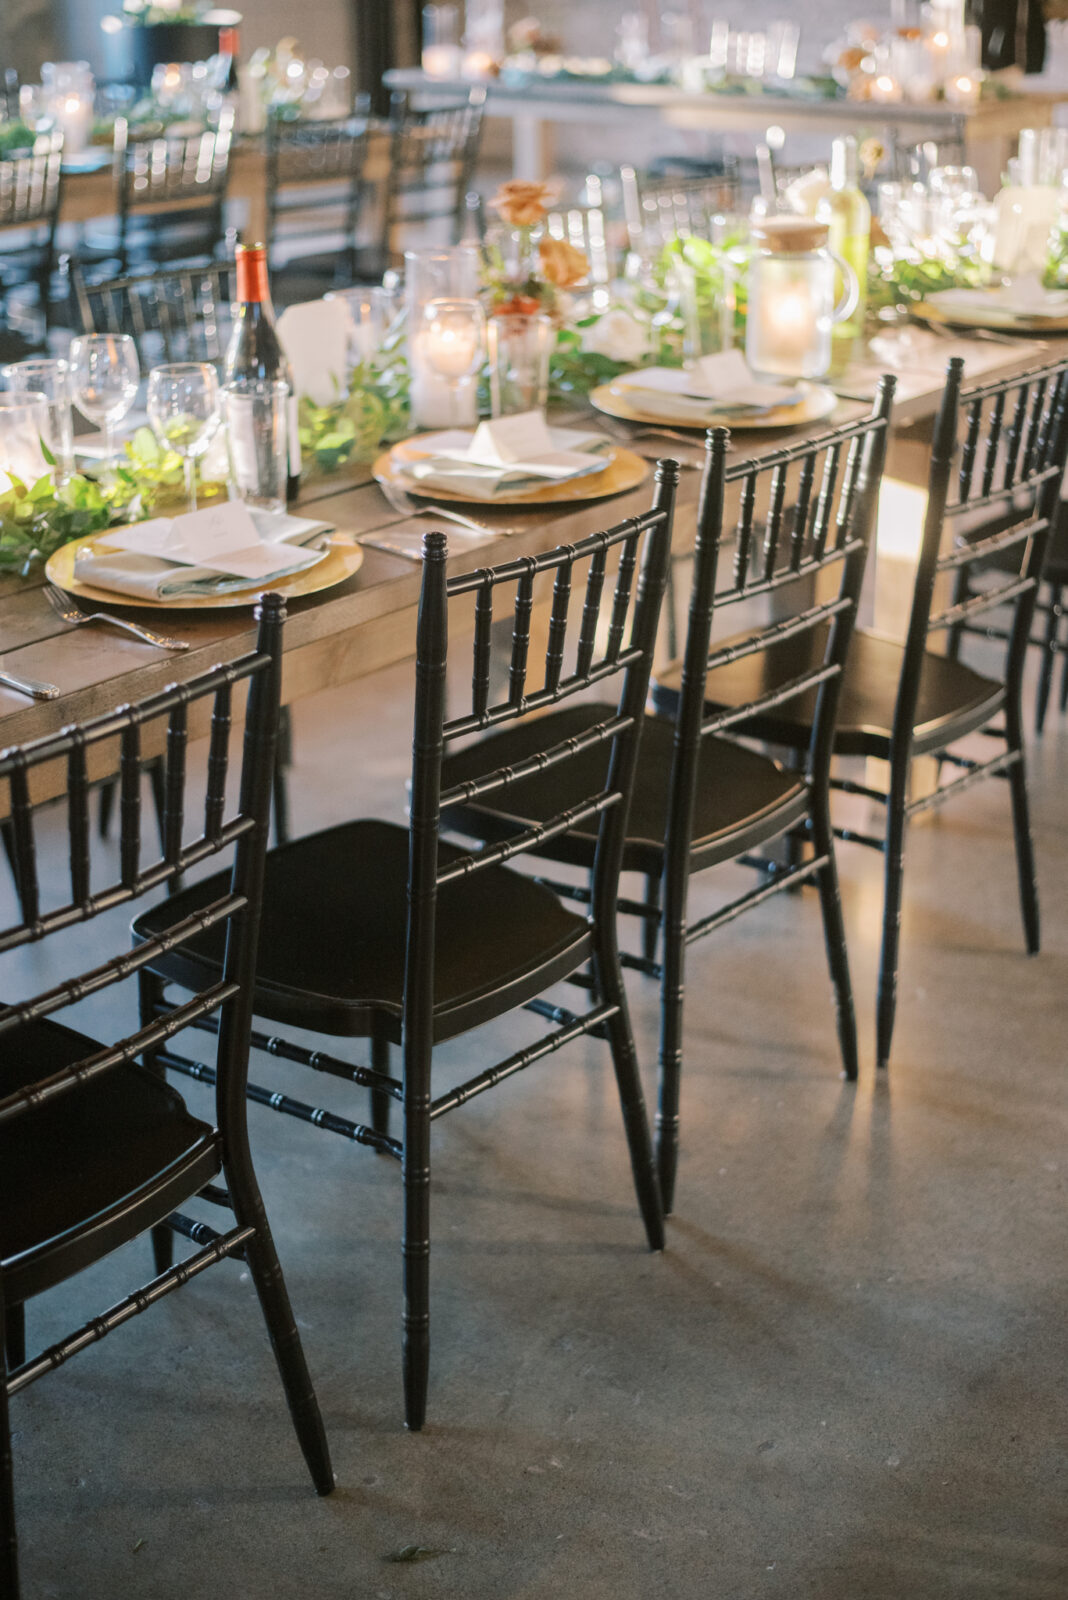 black chiavari chairs for guests during wedding modern wedding reception, fall wedding florals with lush greenery on guest tables, gold charger place settings on long wood tables